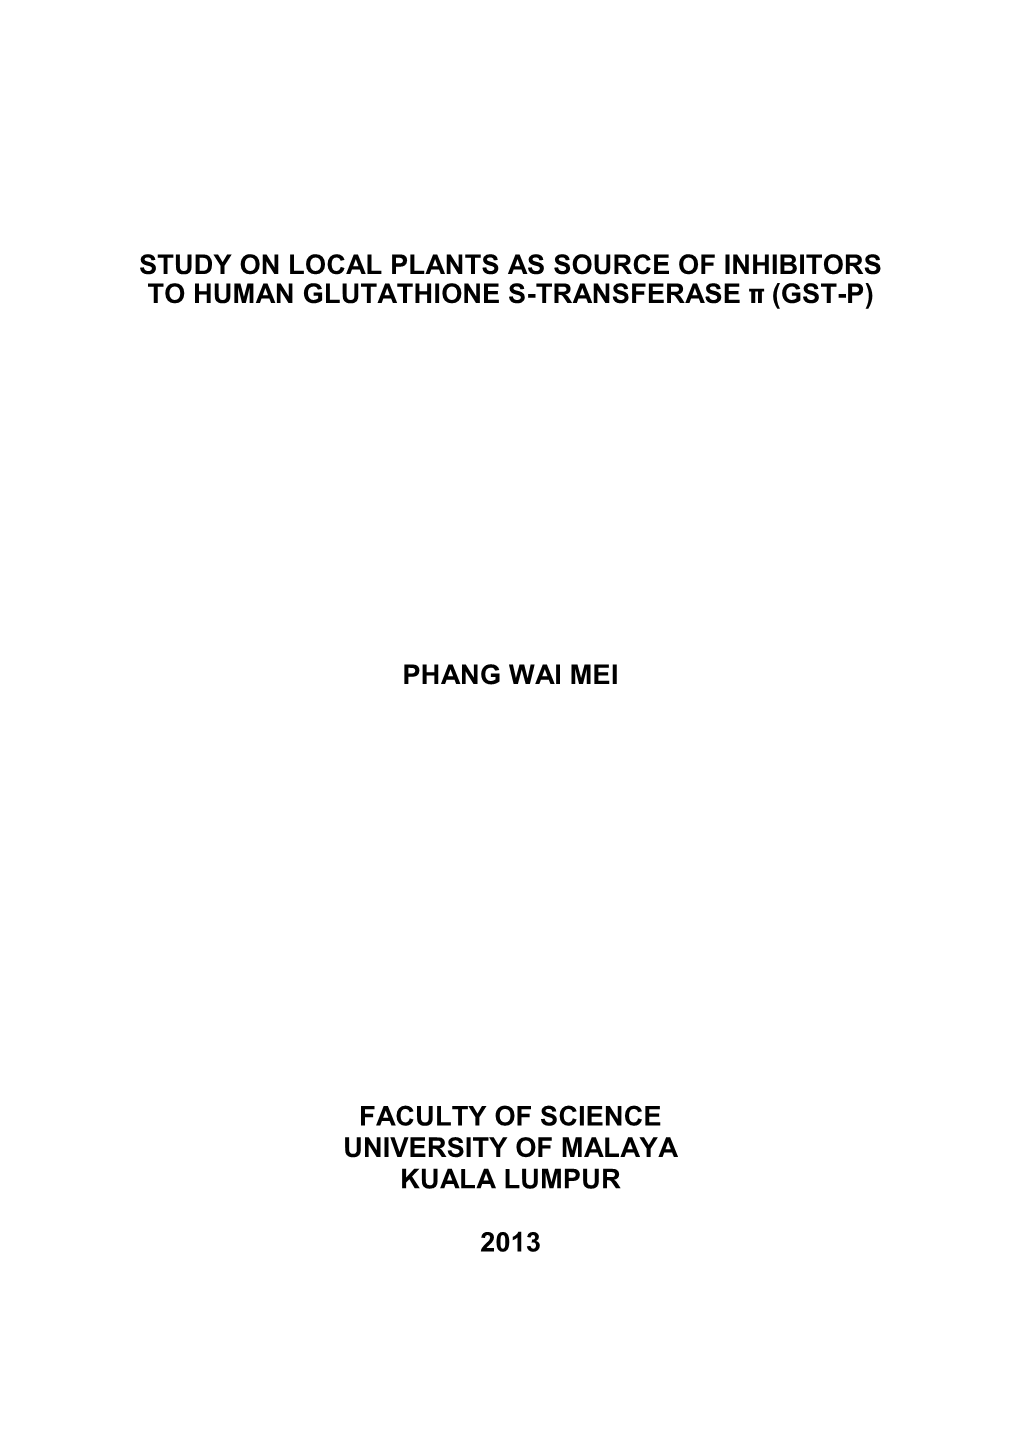 Study on Local Plants As Source of Inhibitors to Human Glutathione S-Transferase Π (Gst-P)